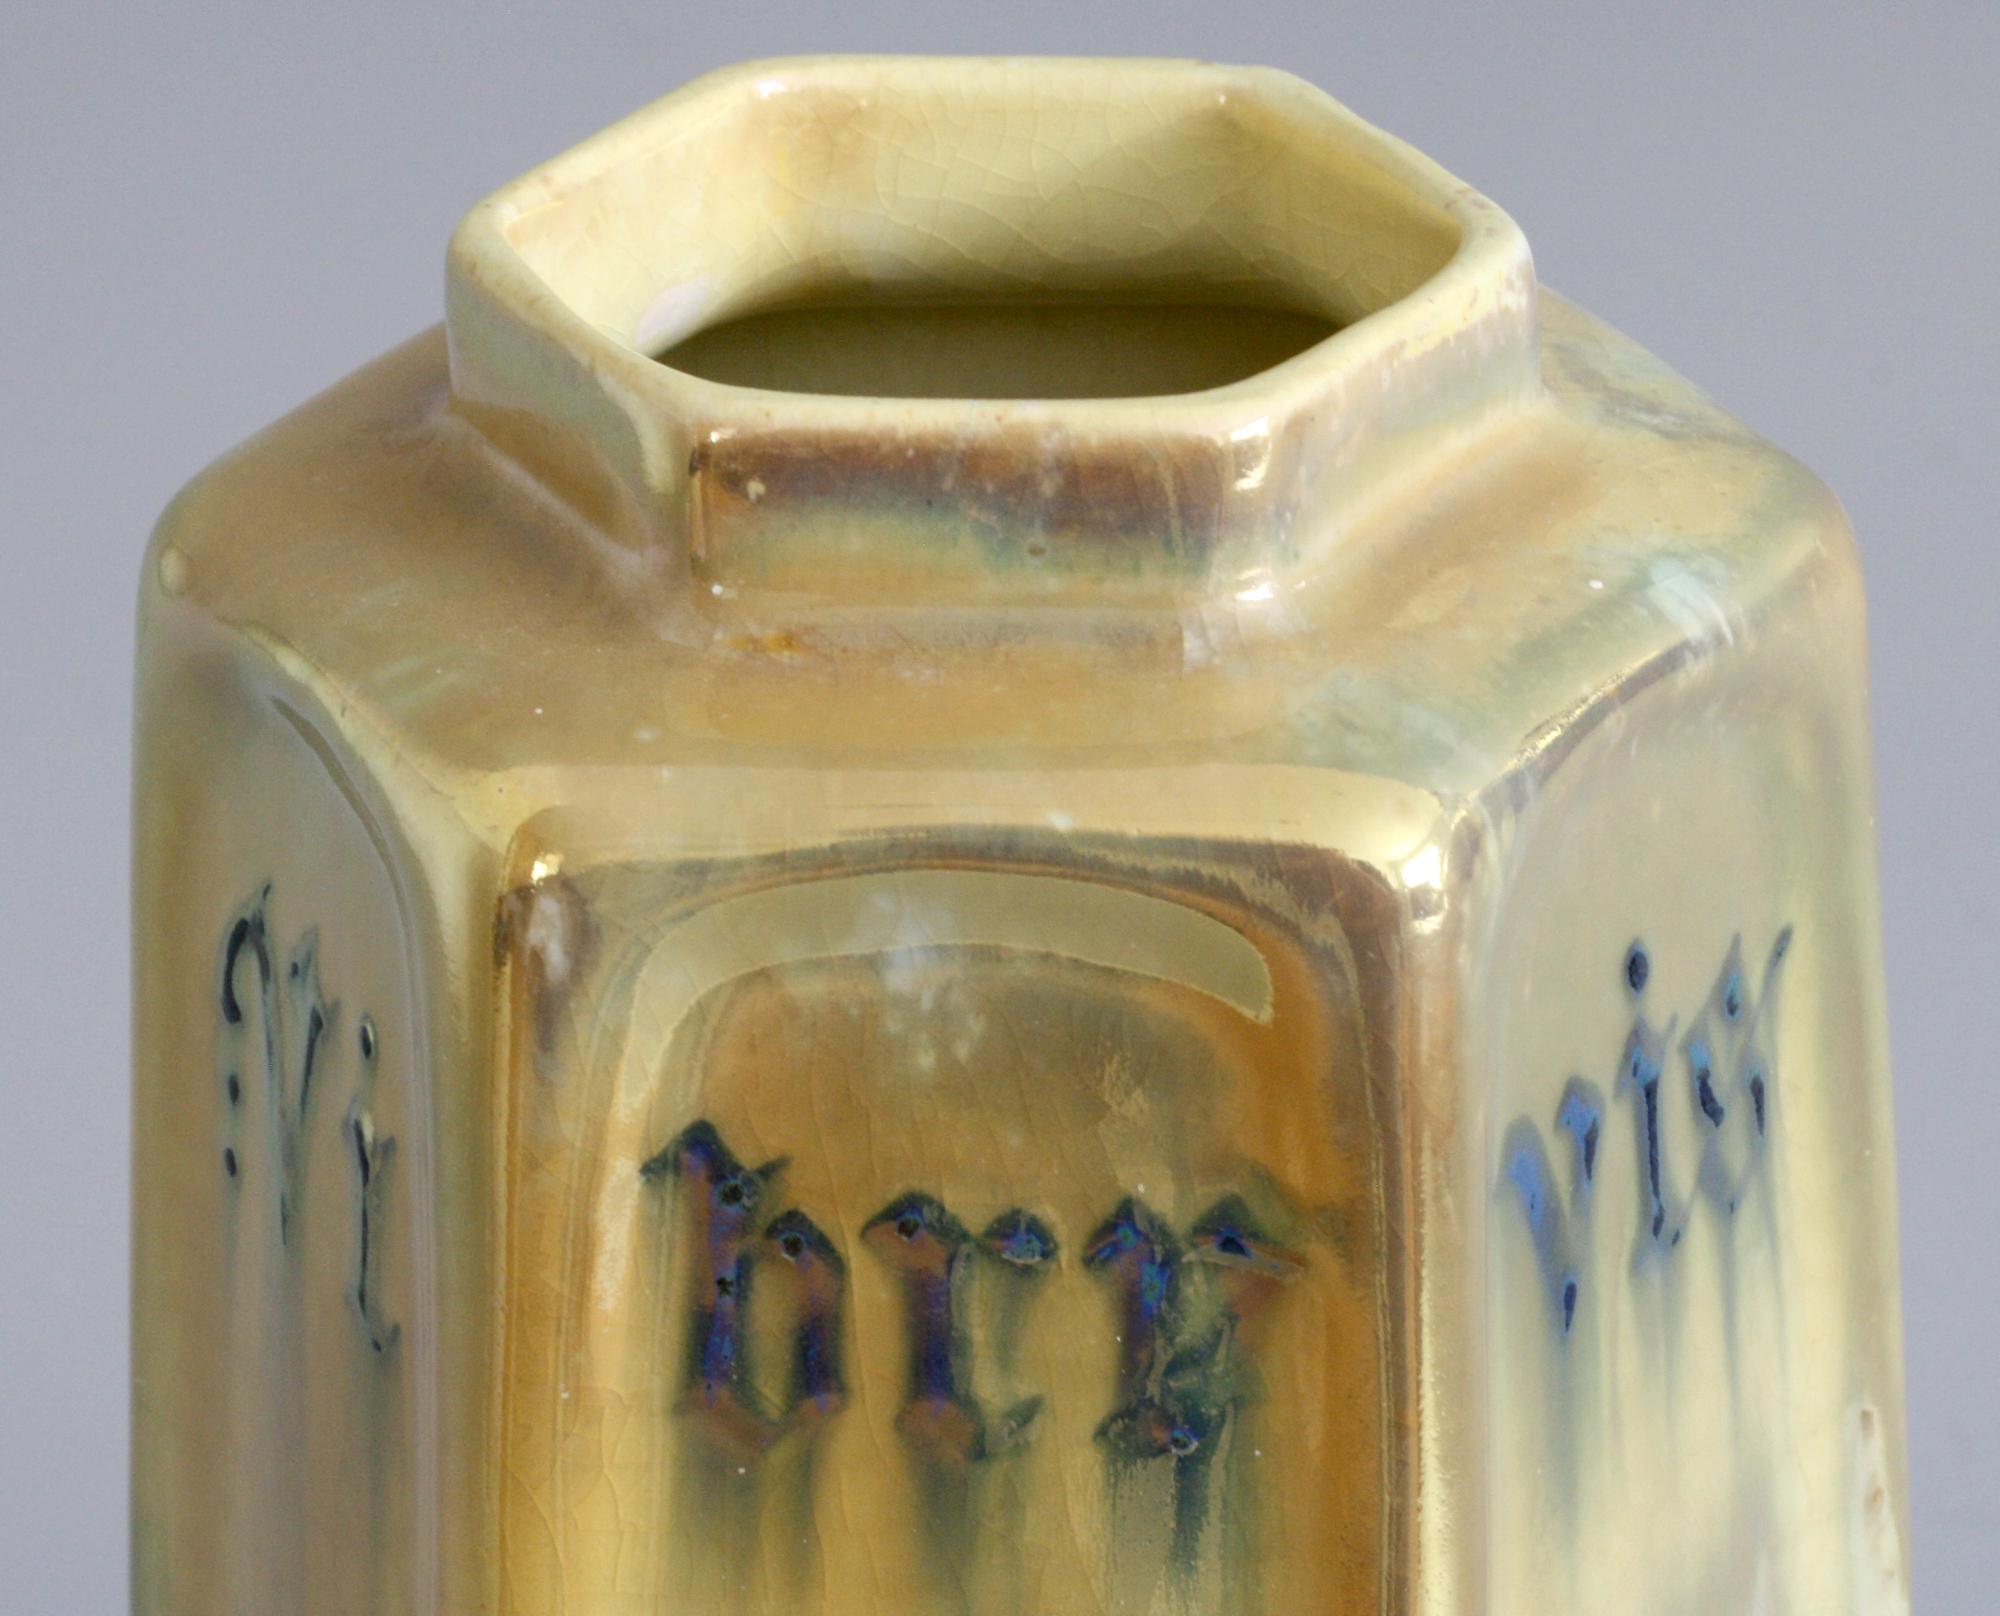 Arts and Crafts Craven Dunnill Arts & Crafts Lustre Glazed Vase by Lewis Foreman Day For Sale